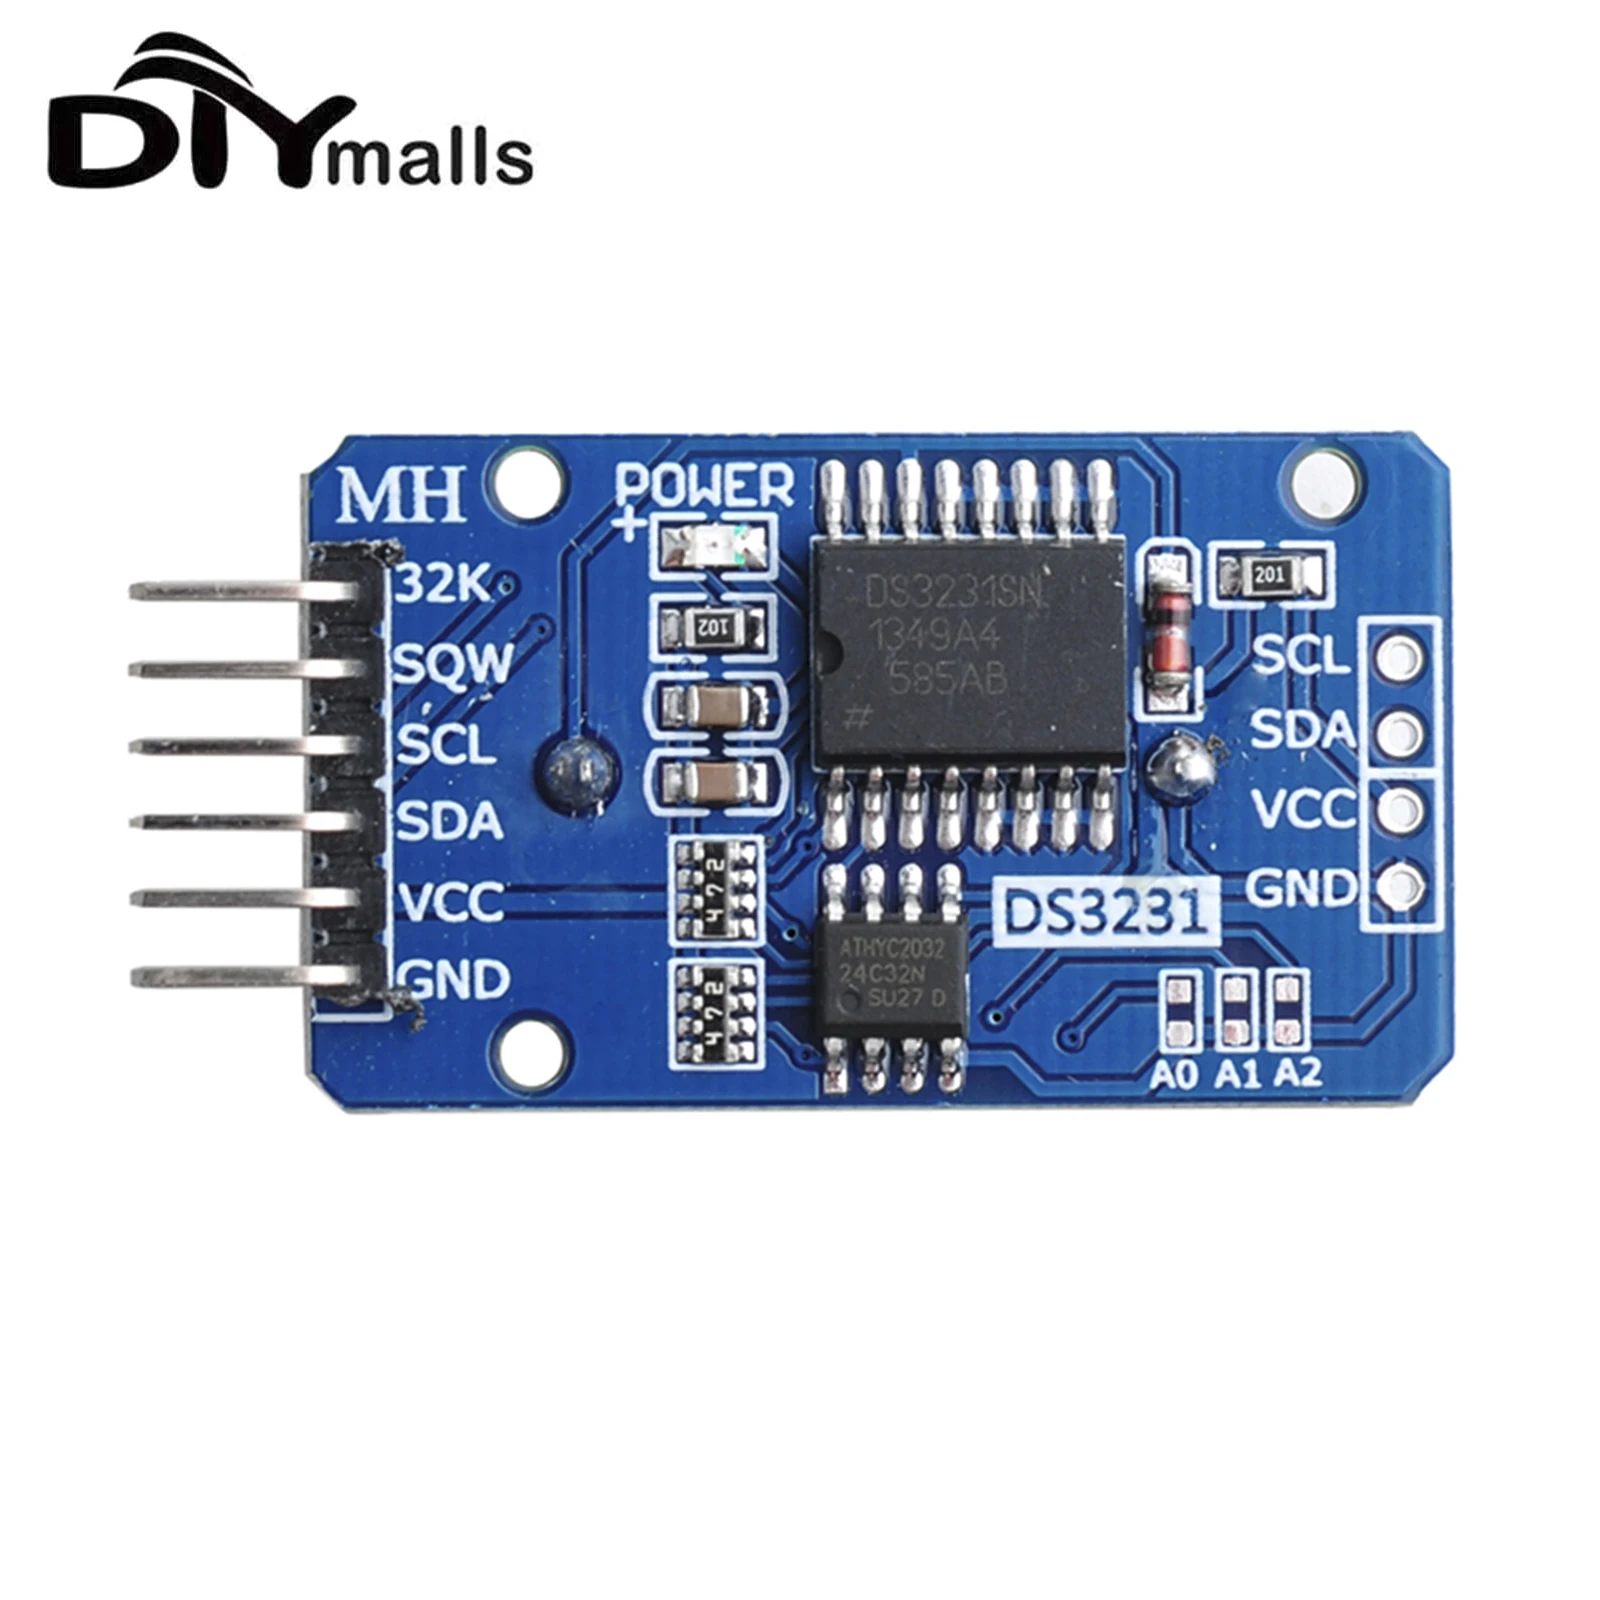 DS3231 AT24C32 IIC Module Precision Clock Module RTC DS3231SN Memory Module for Arduino (without battery) rcmall precision rtc module for raspberry pi pico chip ds3231